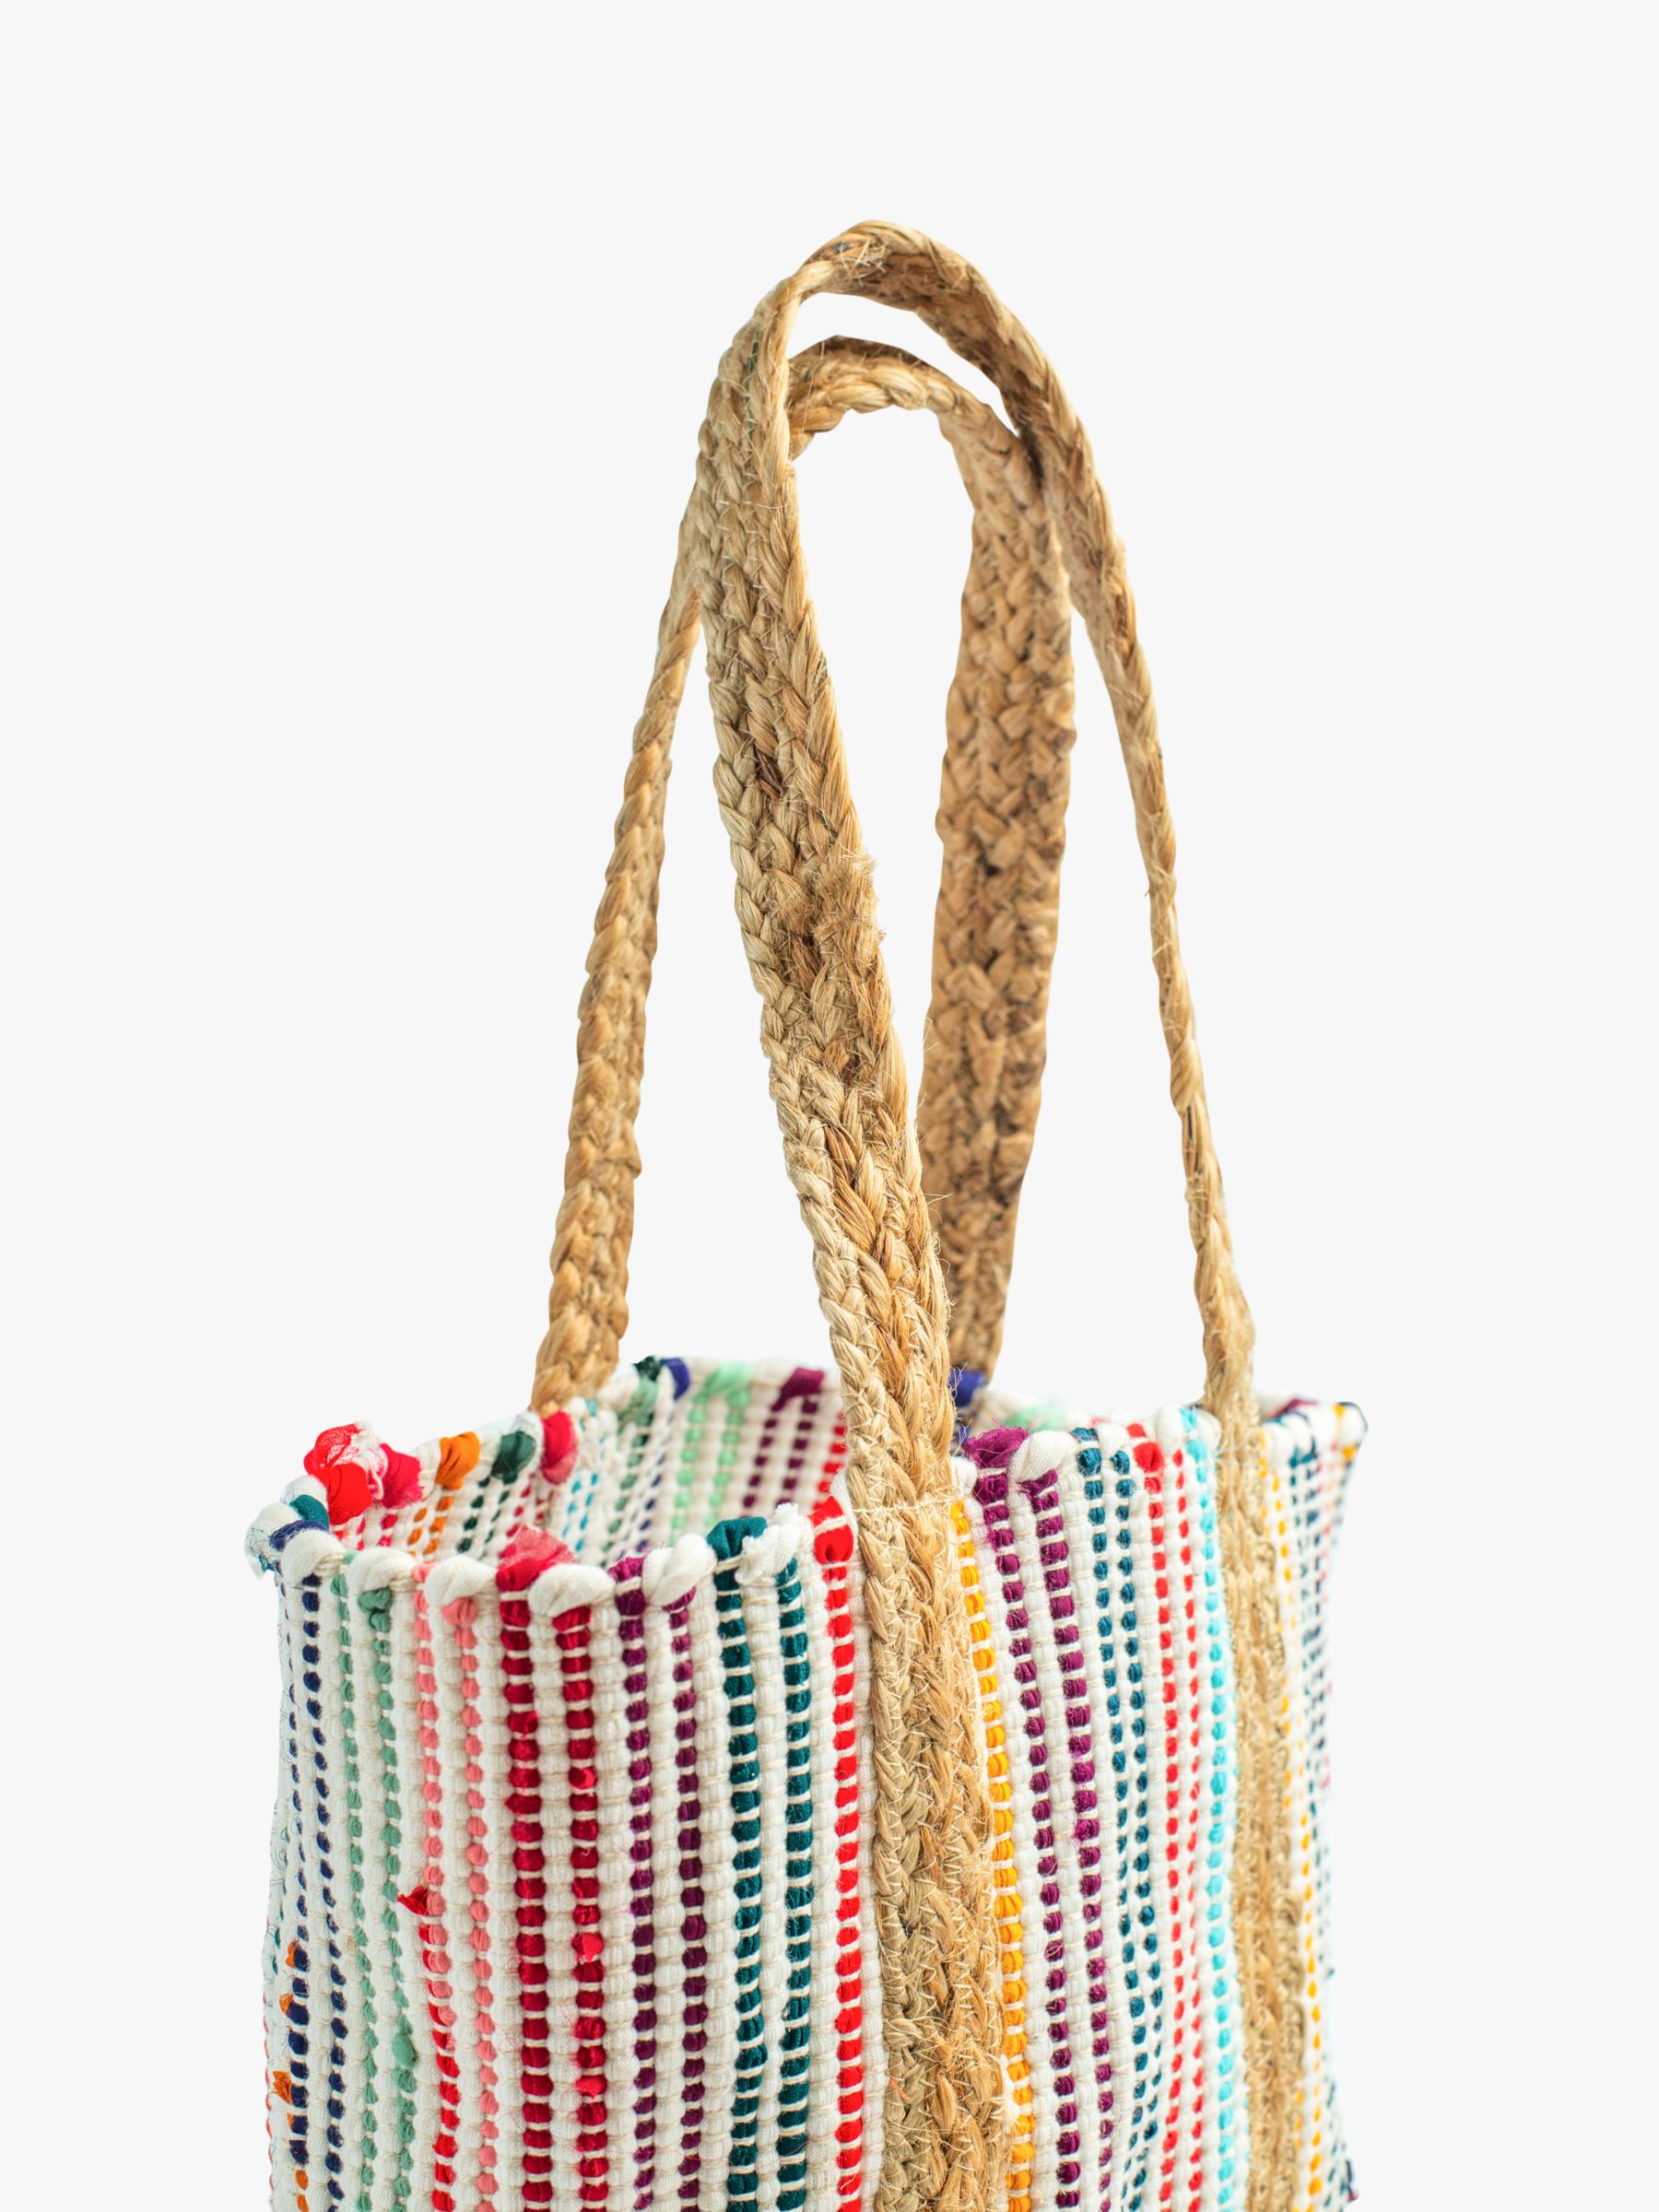 Bloom & Bay Shell Woven Stripe Tote Bag, Multi, One Size